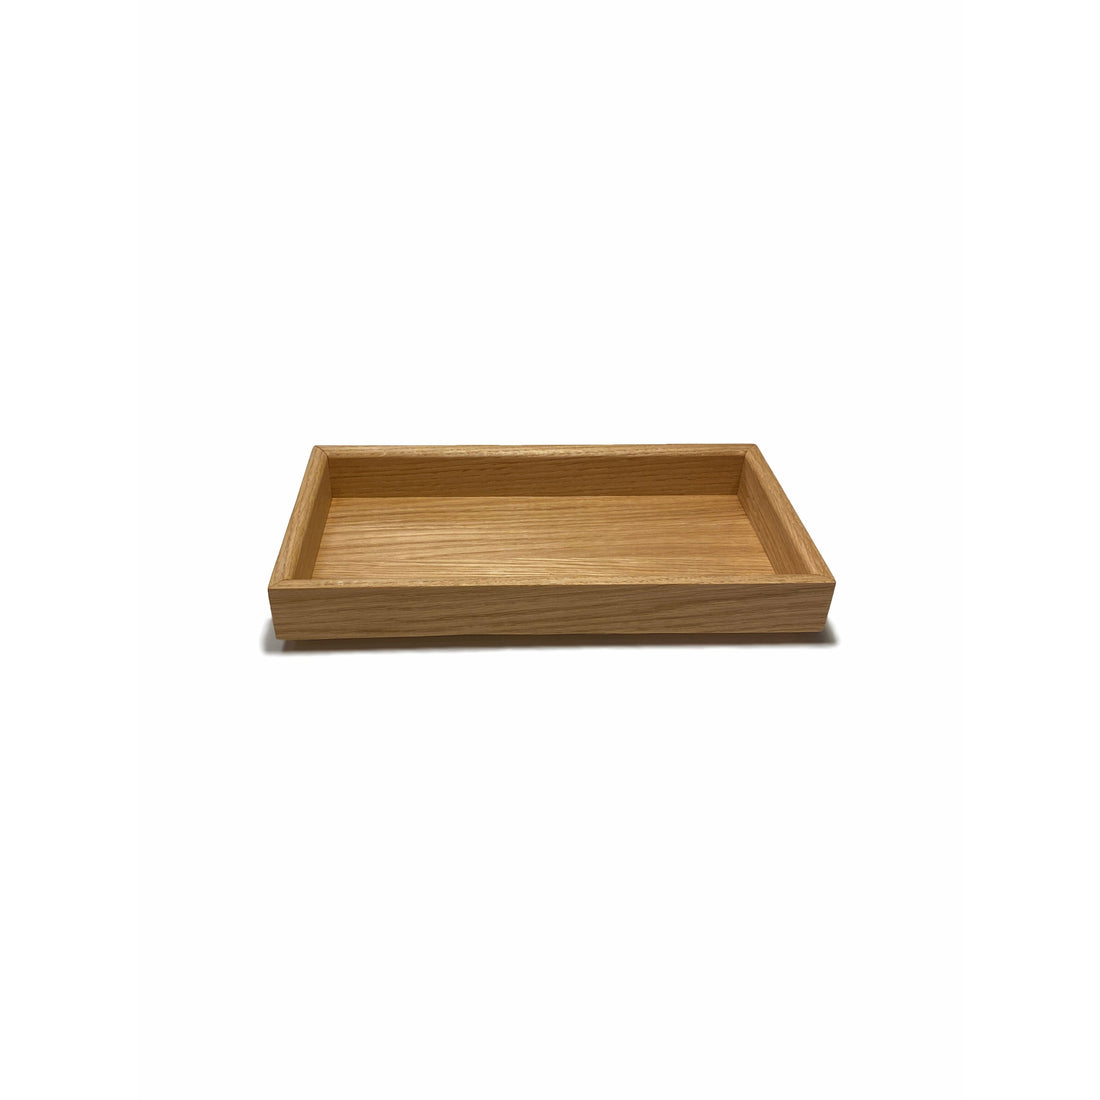 Langbo Large Stackable Tray - Natural Oiled Oak